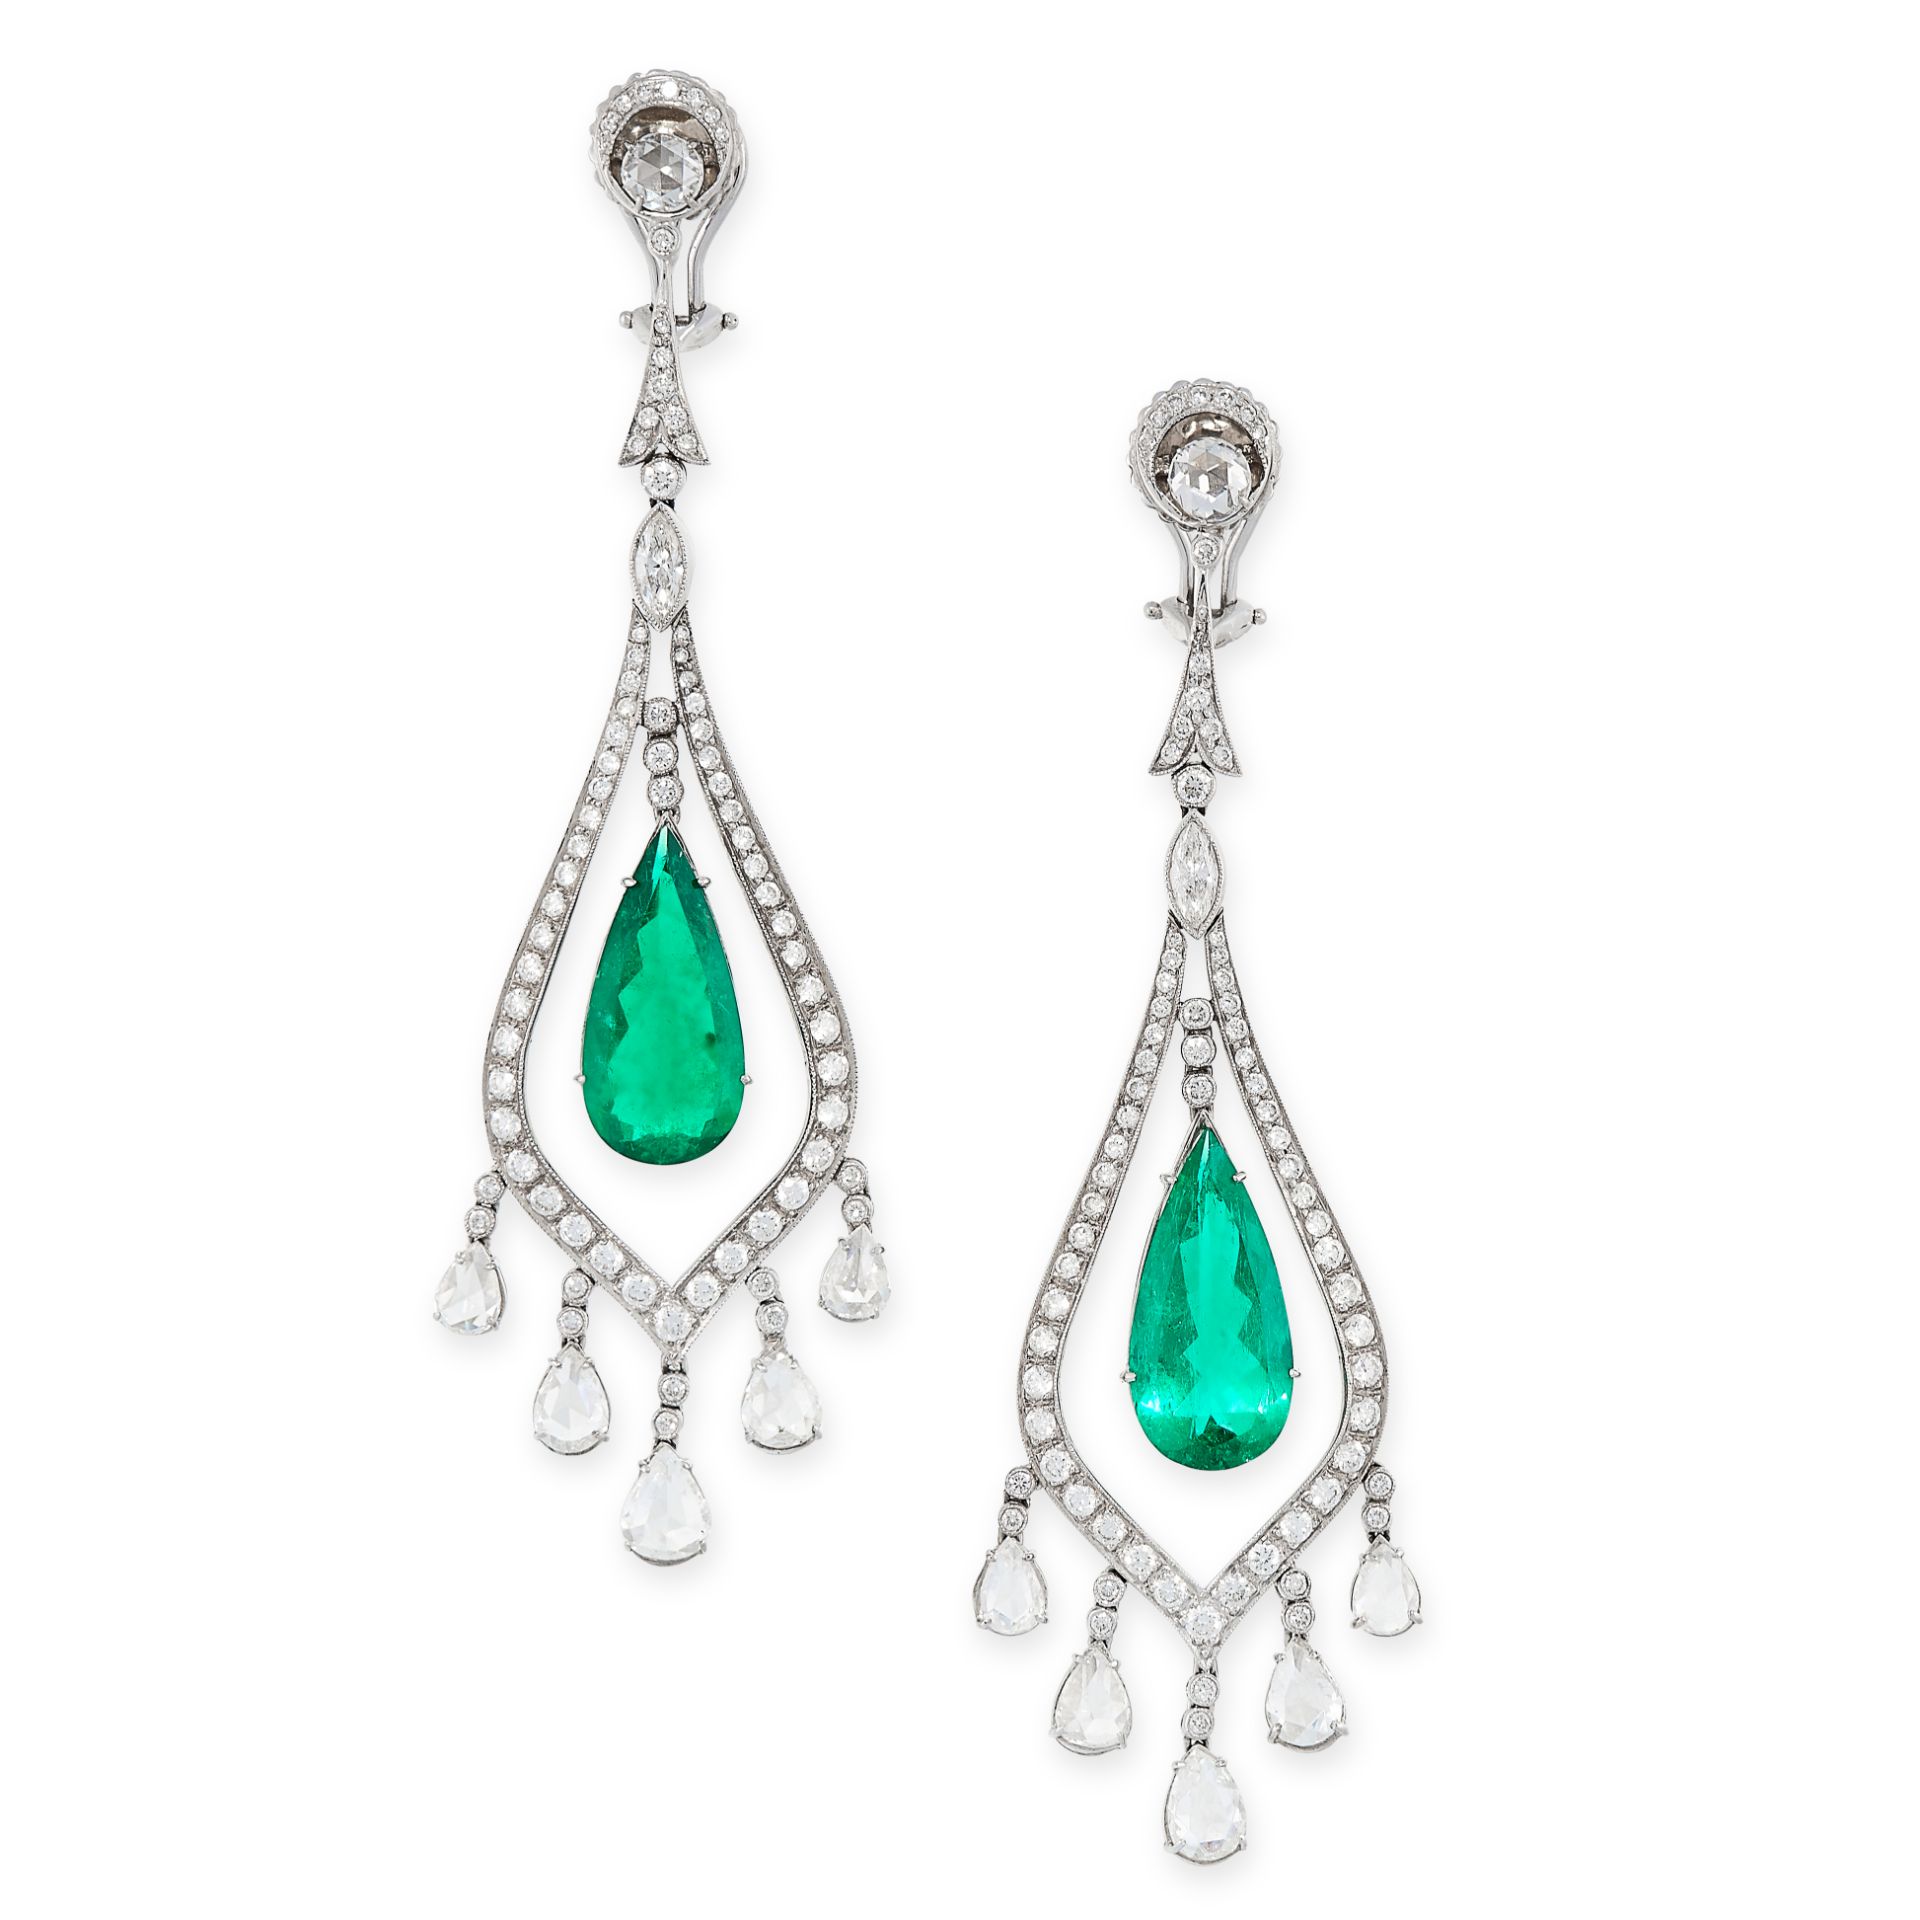 A PAIR OF COLOMBIAN EMERALD AND DIAMOND EARRINGS in white gold, each set with a pear cut emerald,